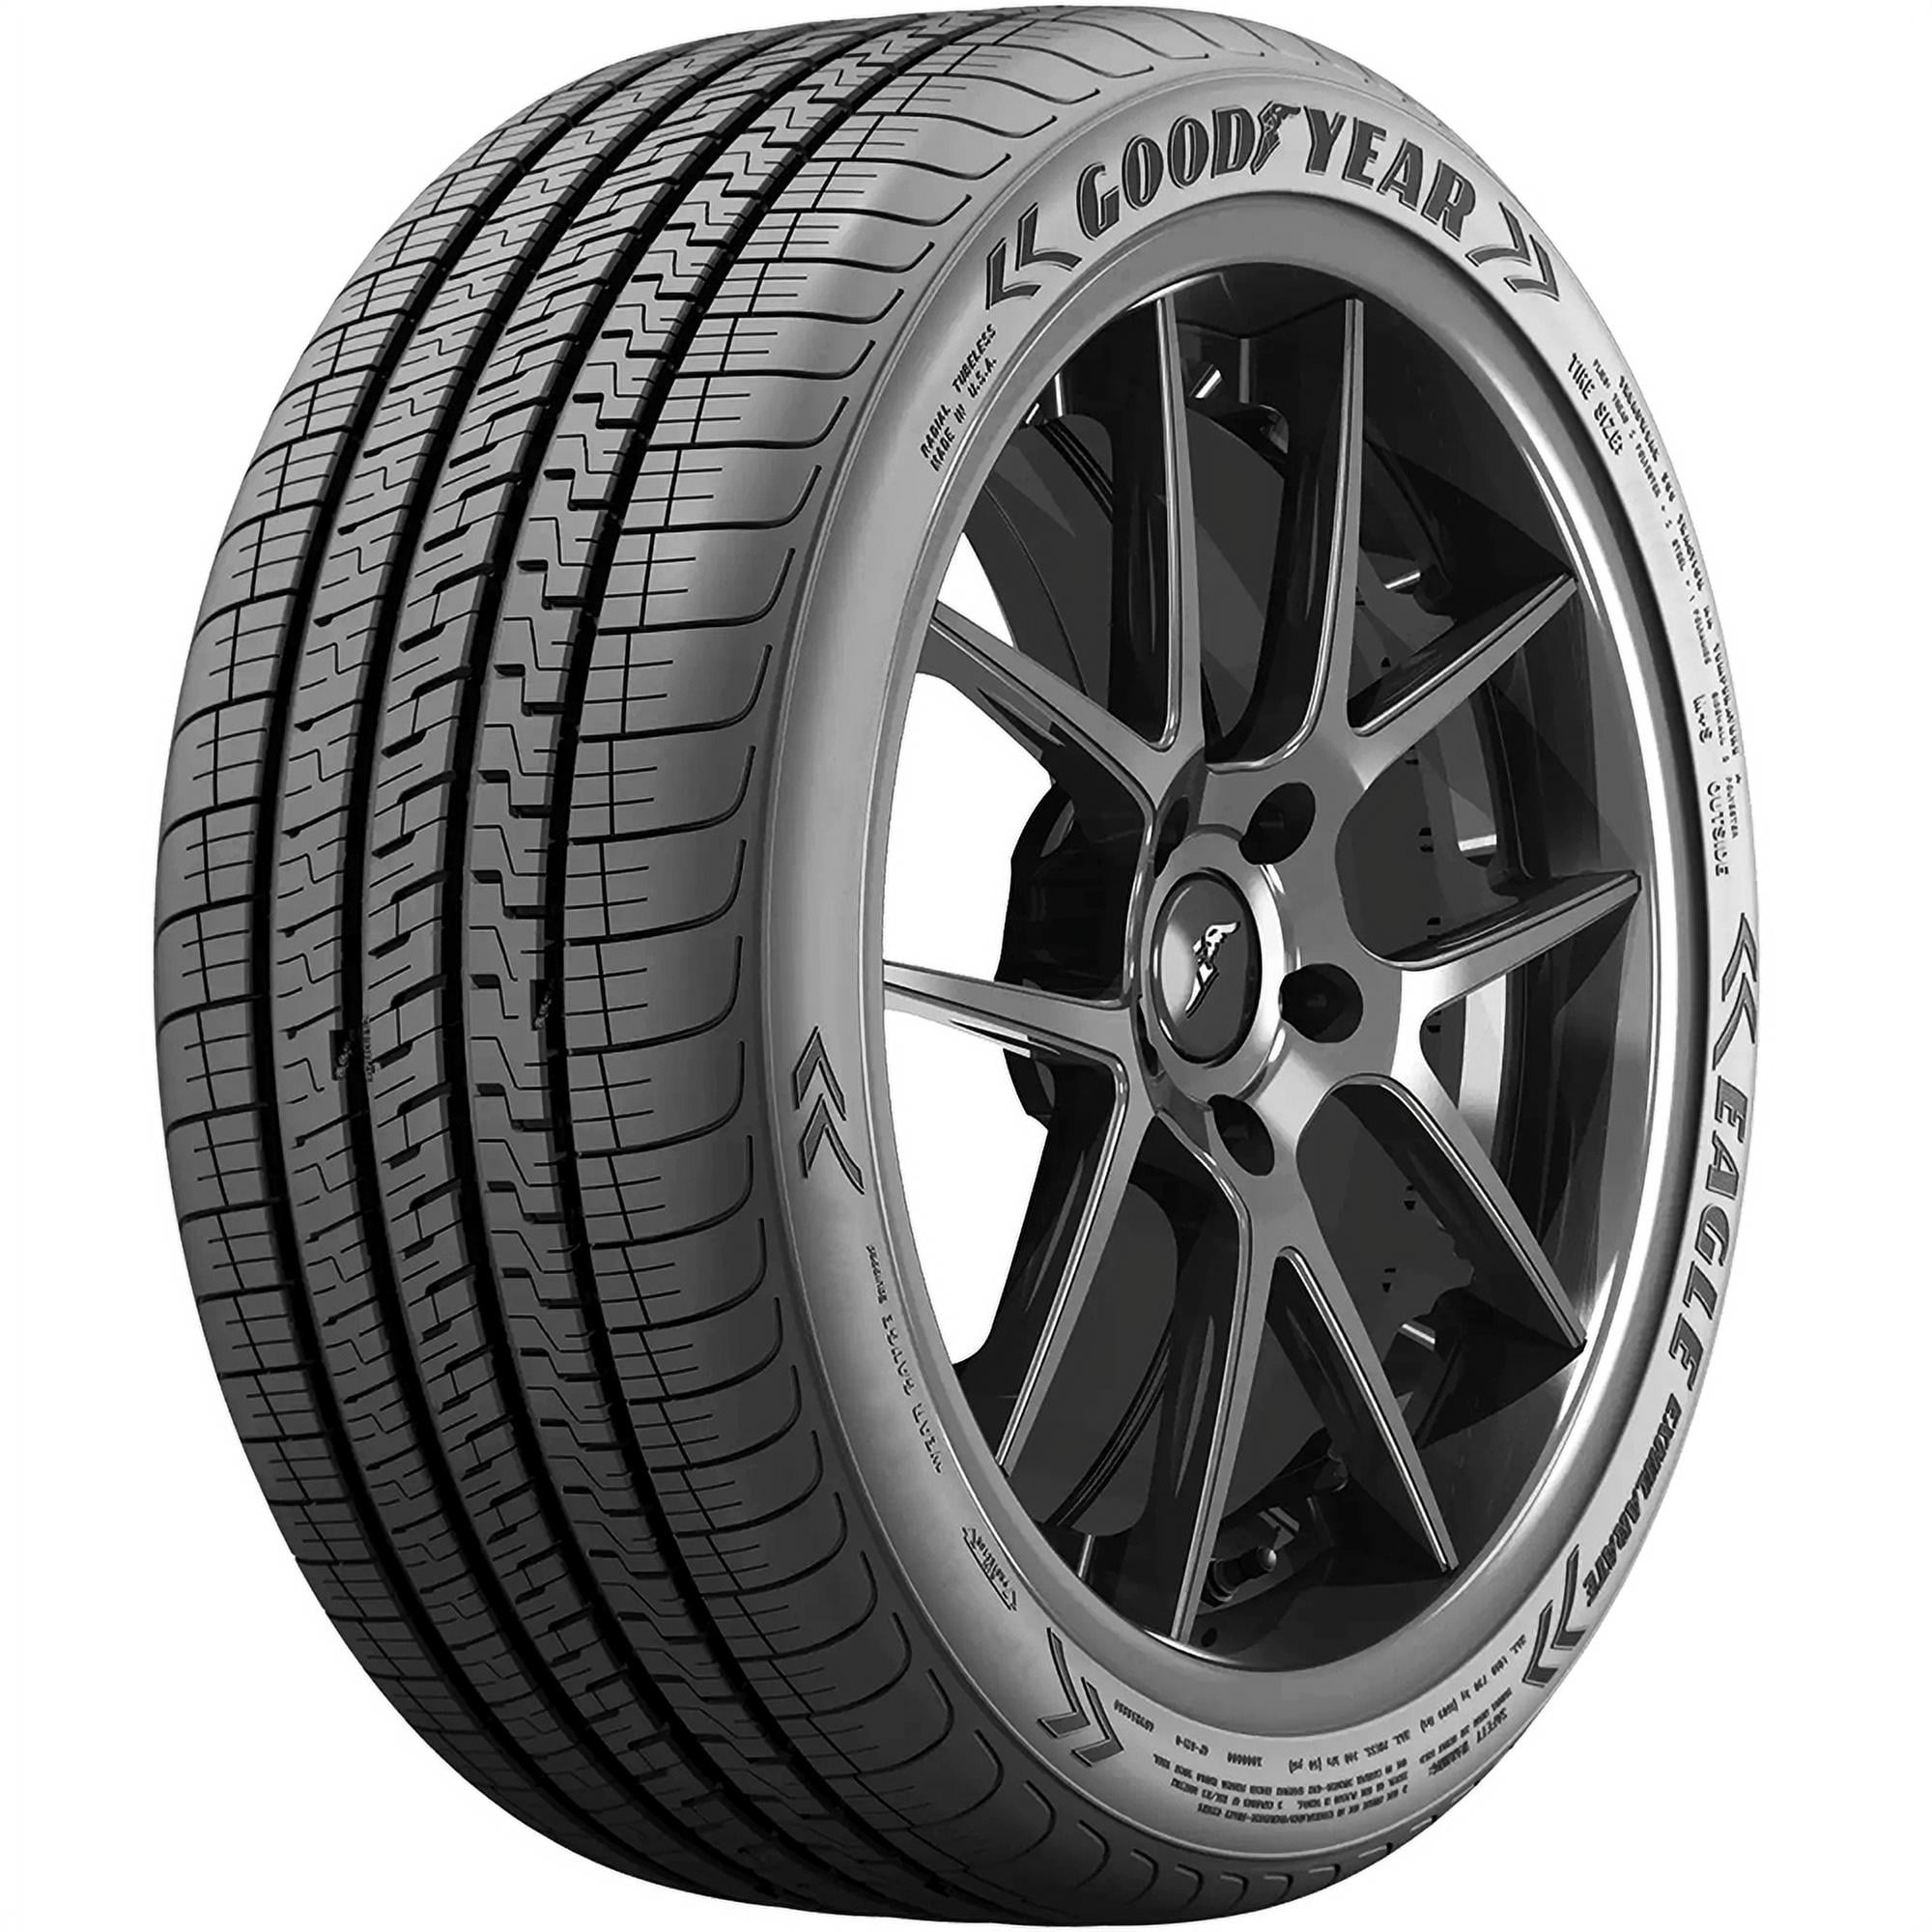 Goodyear Eagle Exhilarate UHP 245/45R20 103Y XL Passenger